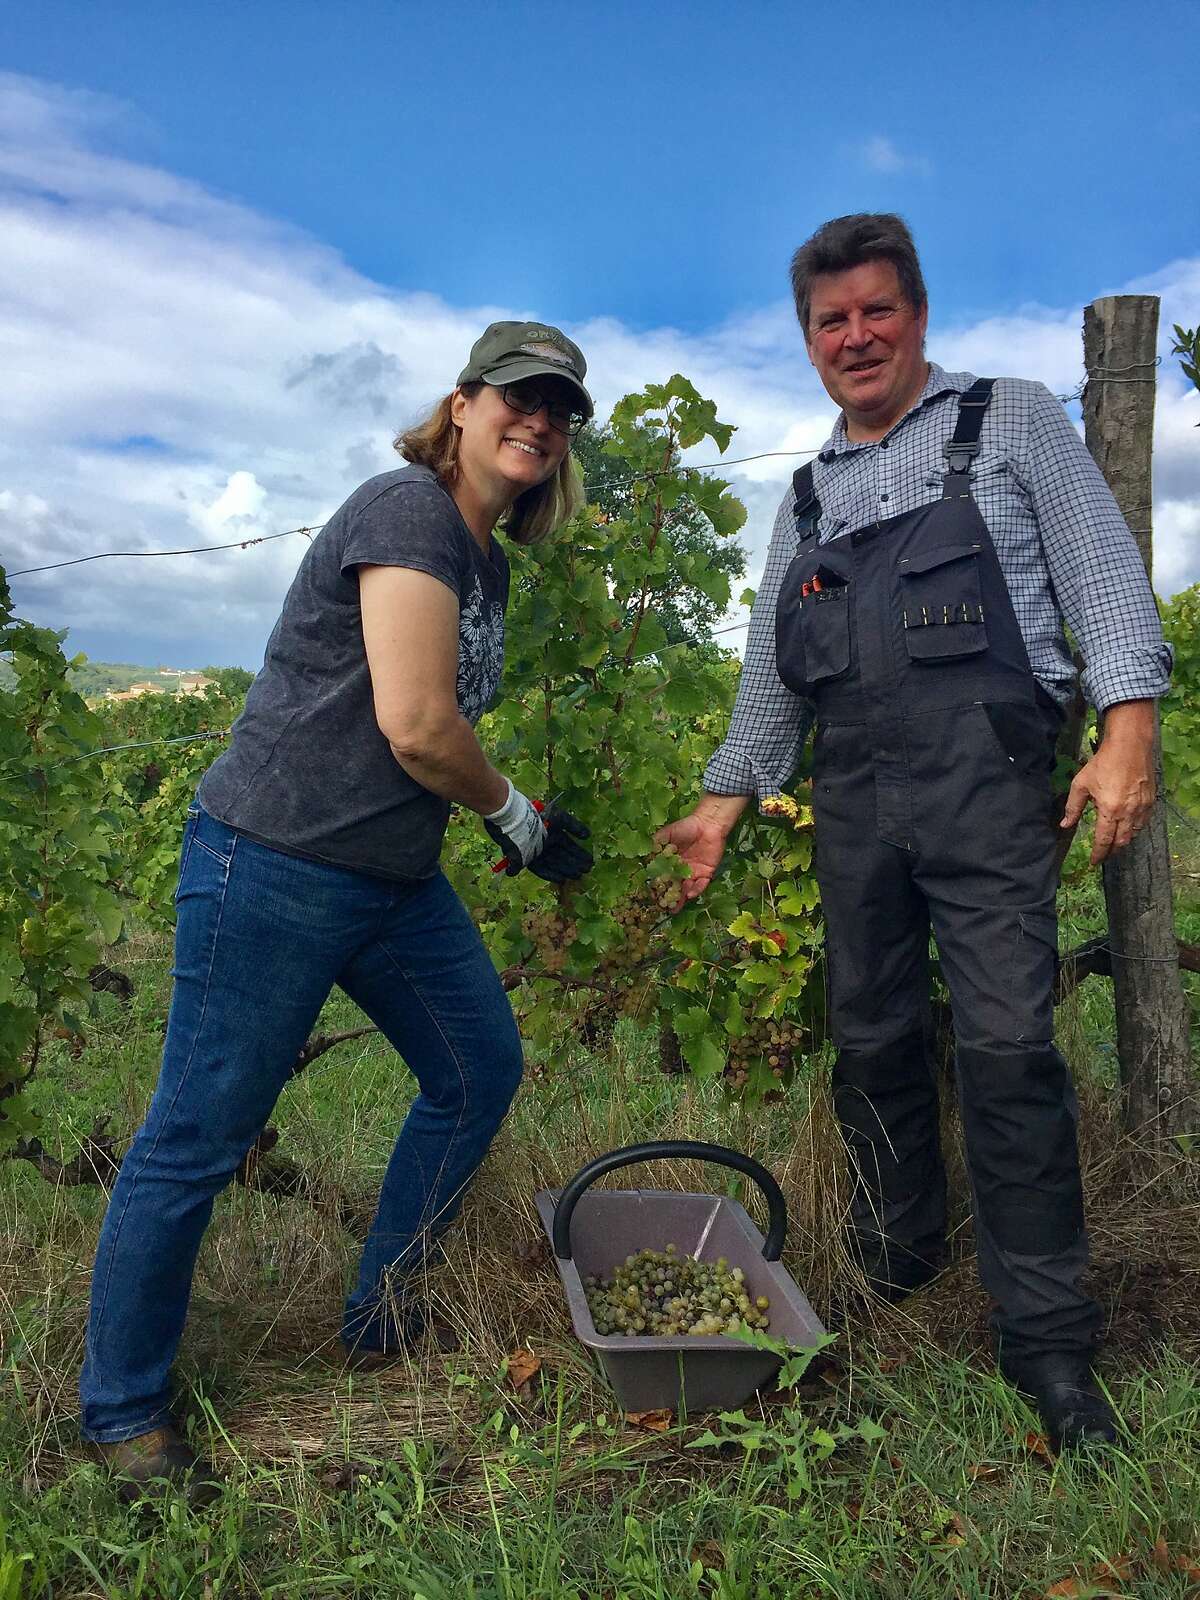 Diana Lucz (left) and Steve Lawrence tend the vines at Chateau La Corne, the Bordeaux estate that they own.